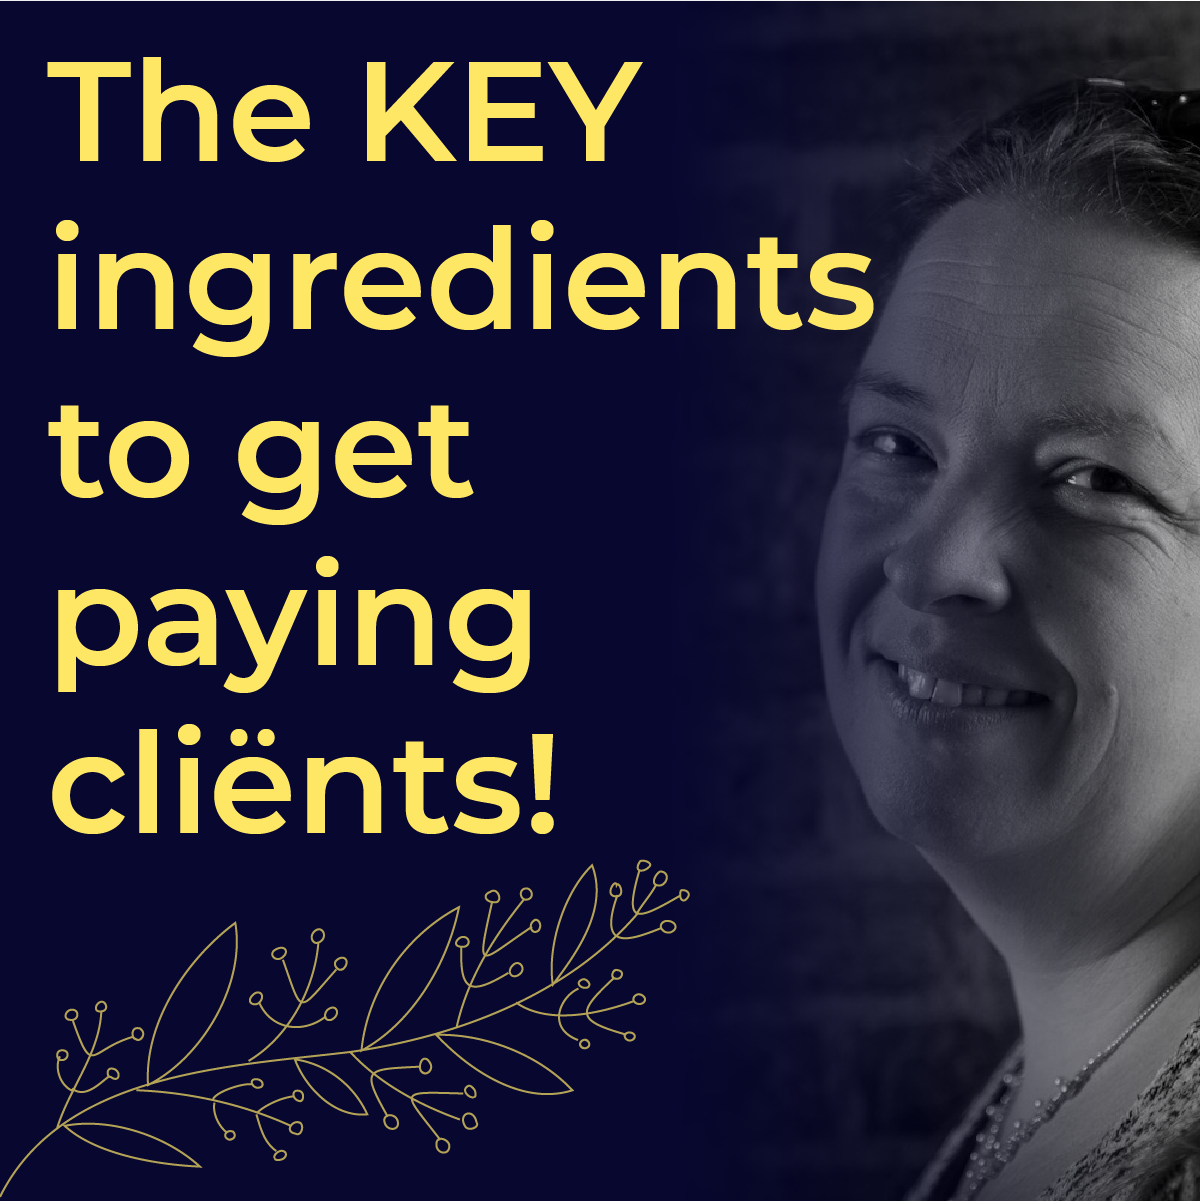 The KEY ingredients to get paying clients!